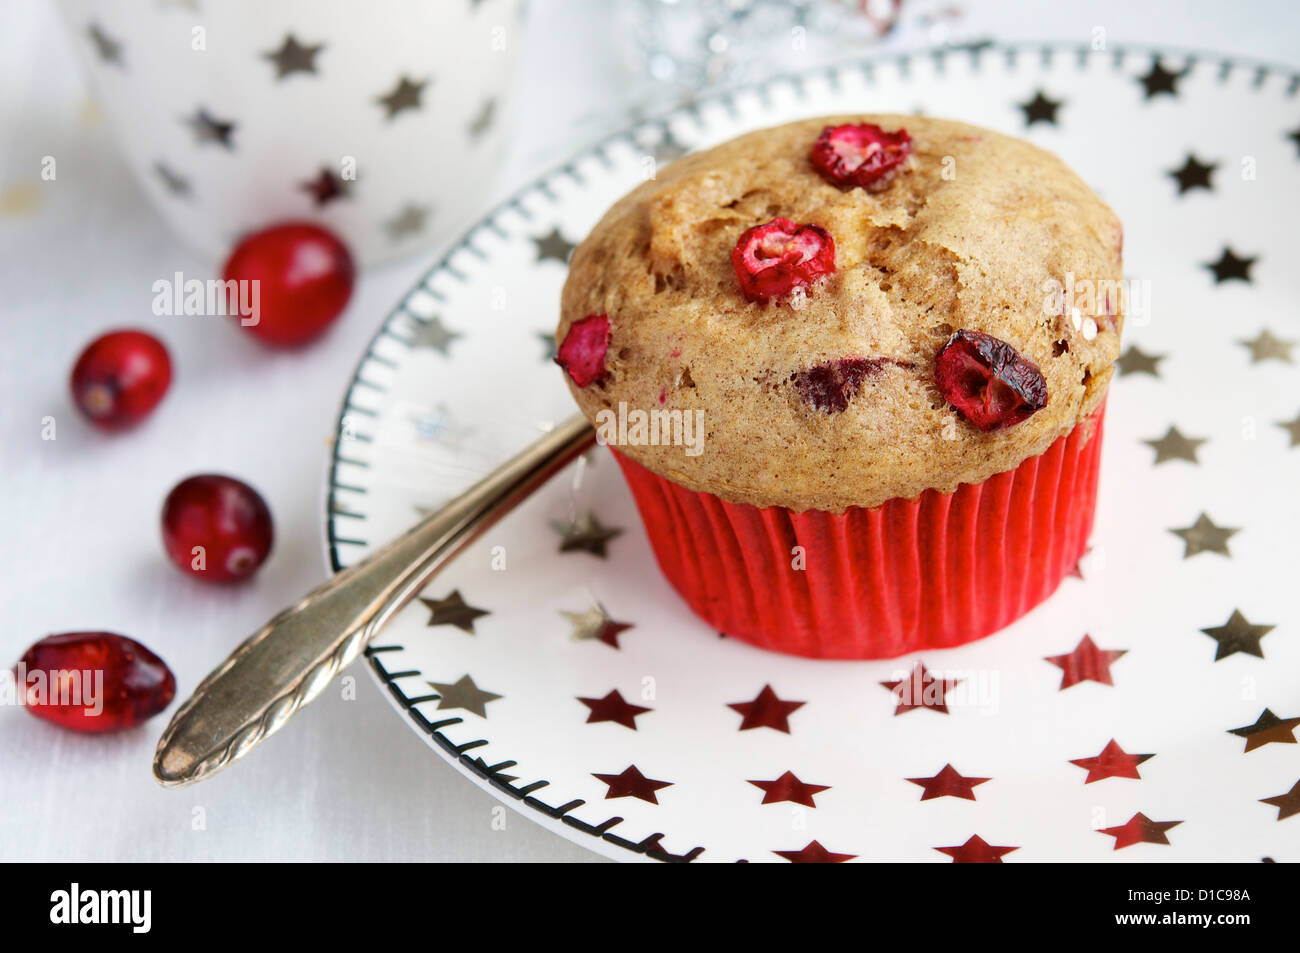 Apple and cranberry muffin (vegan) on a plate with silver stars. Stock Photo